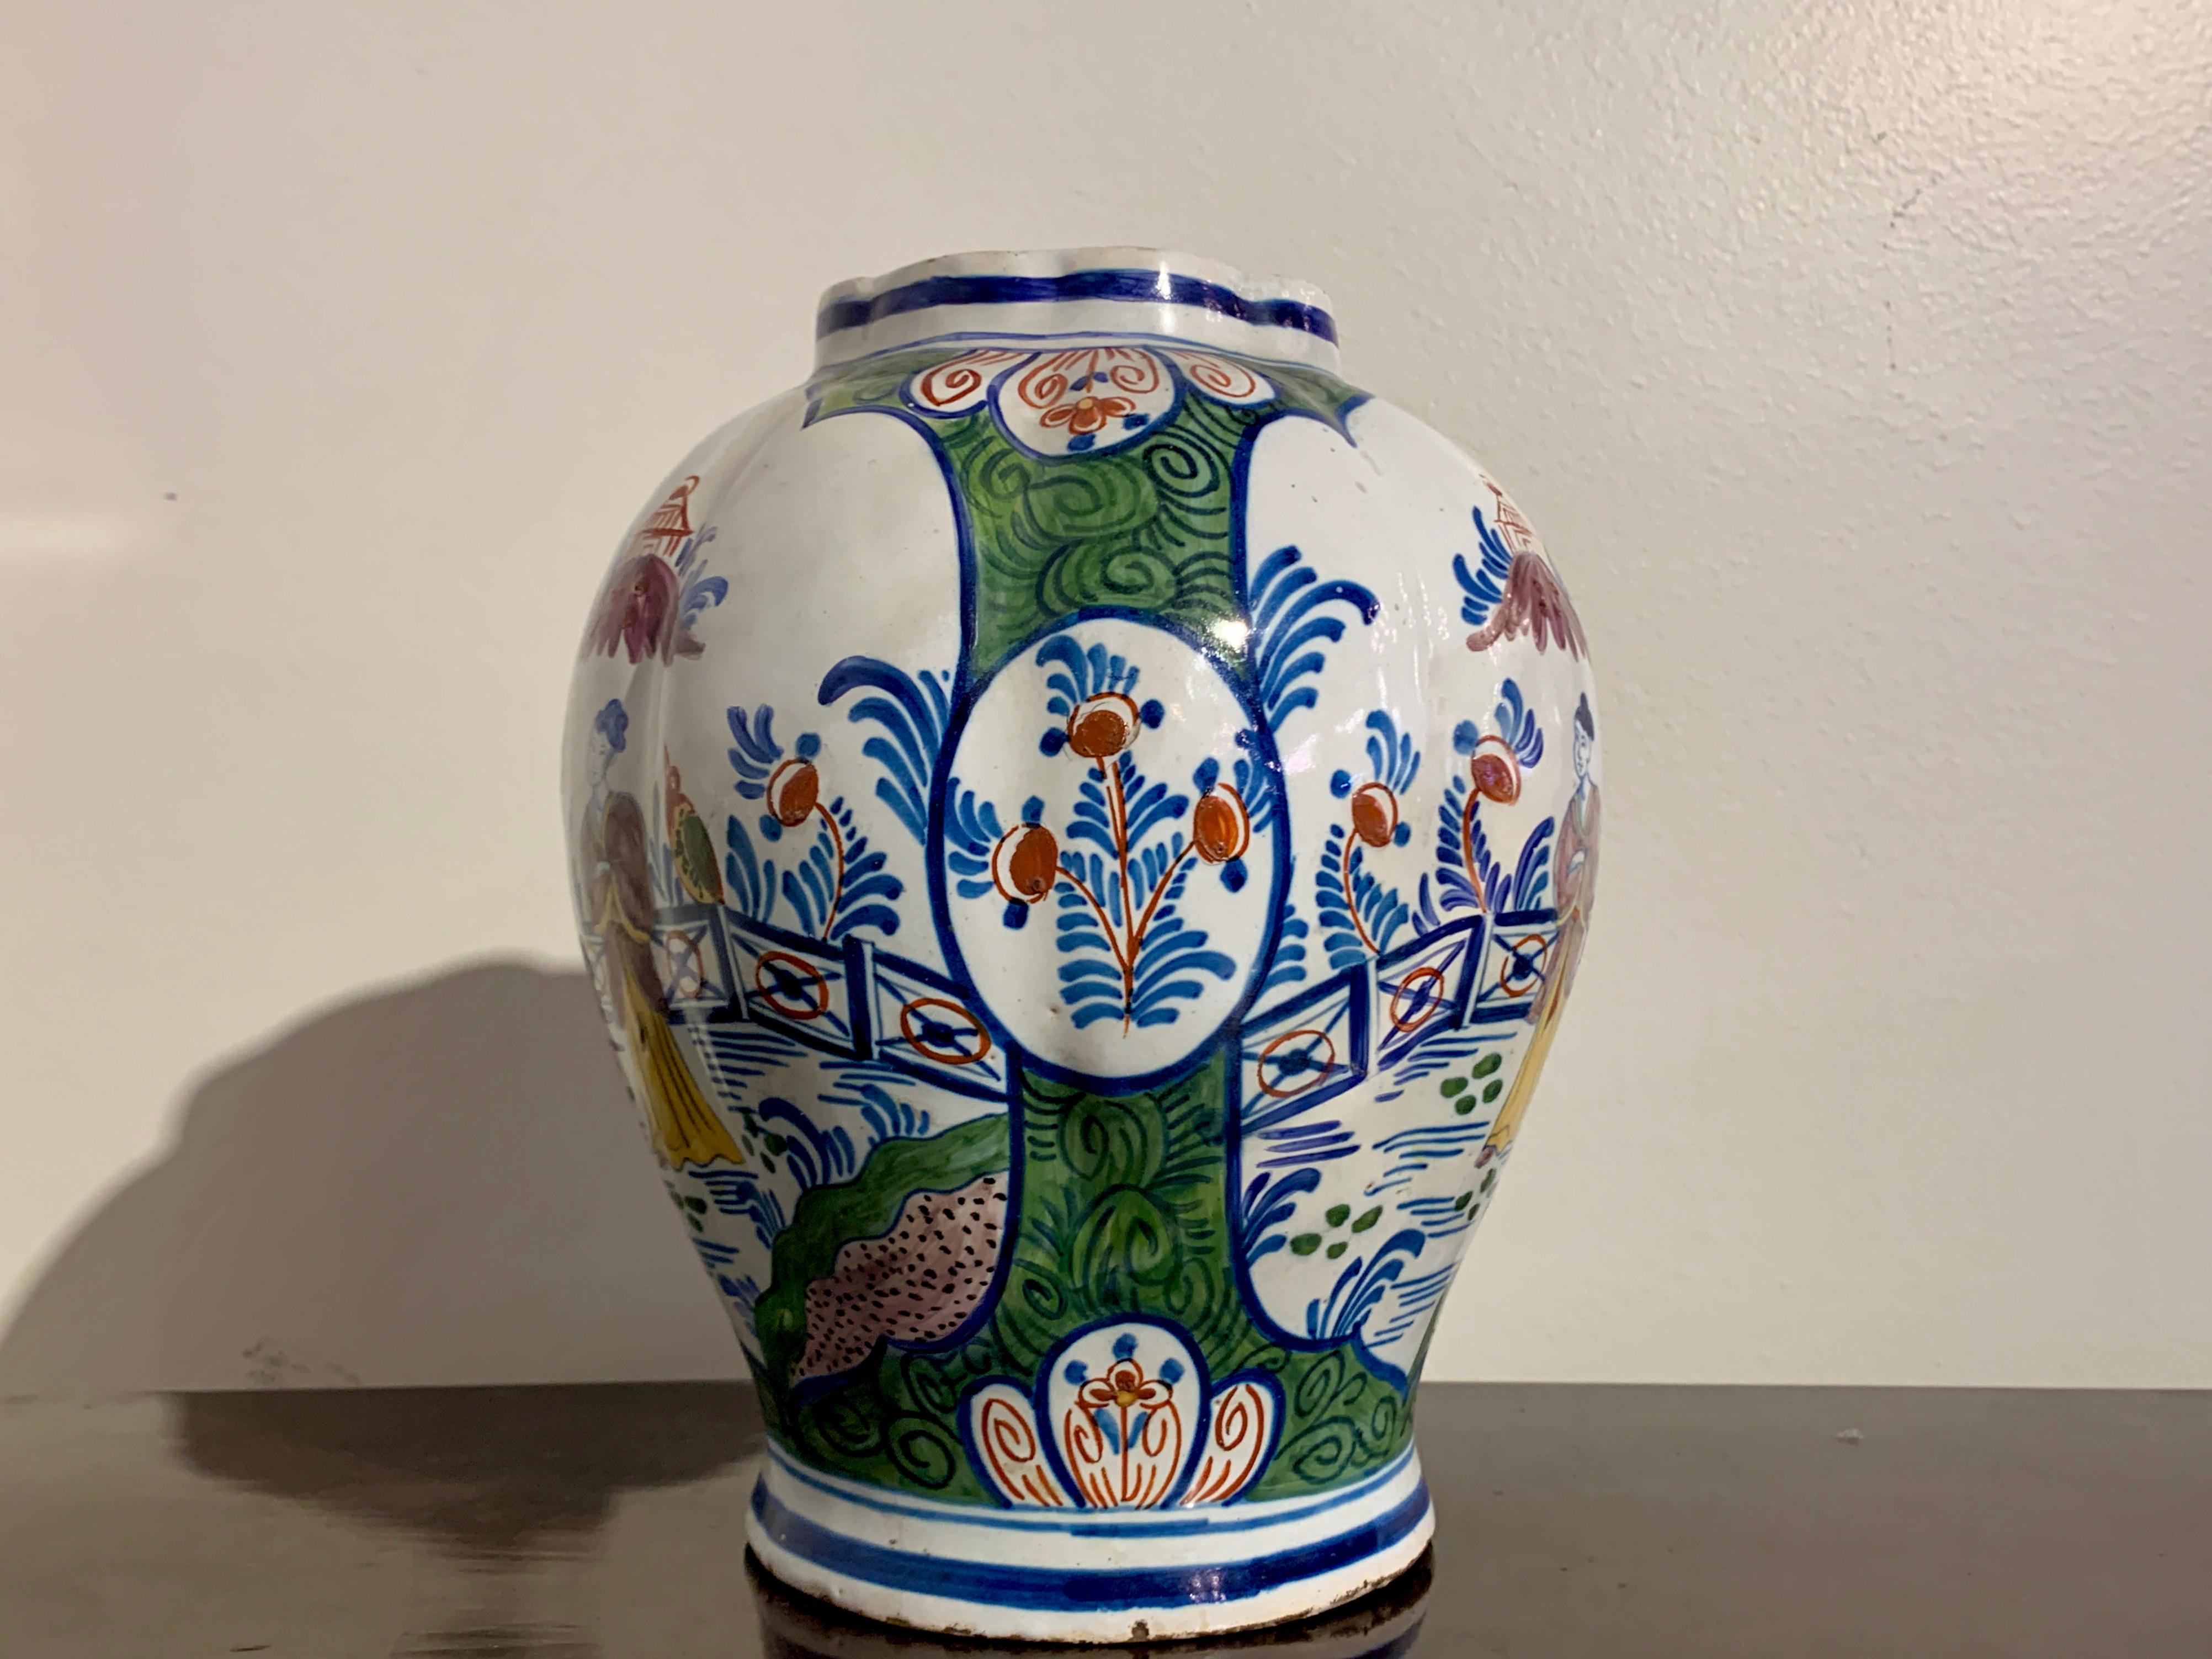 A charming Dutch Delft ginger jar of lobed form, with chinoiserie design in polychrome tin glazed enamels, 18th century, Holland. 

The ginger jar (missing its lid), of globular form with a lobed body. The body decorated in fanciful polychrome tin